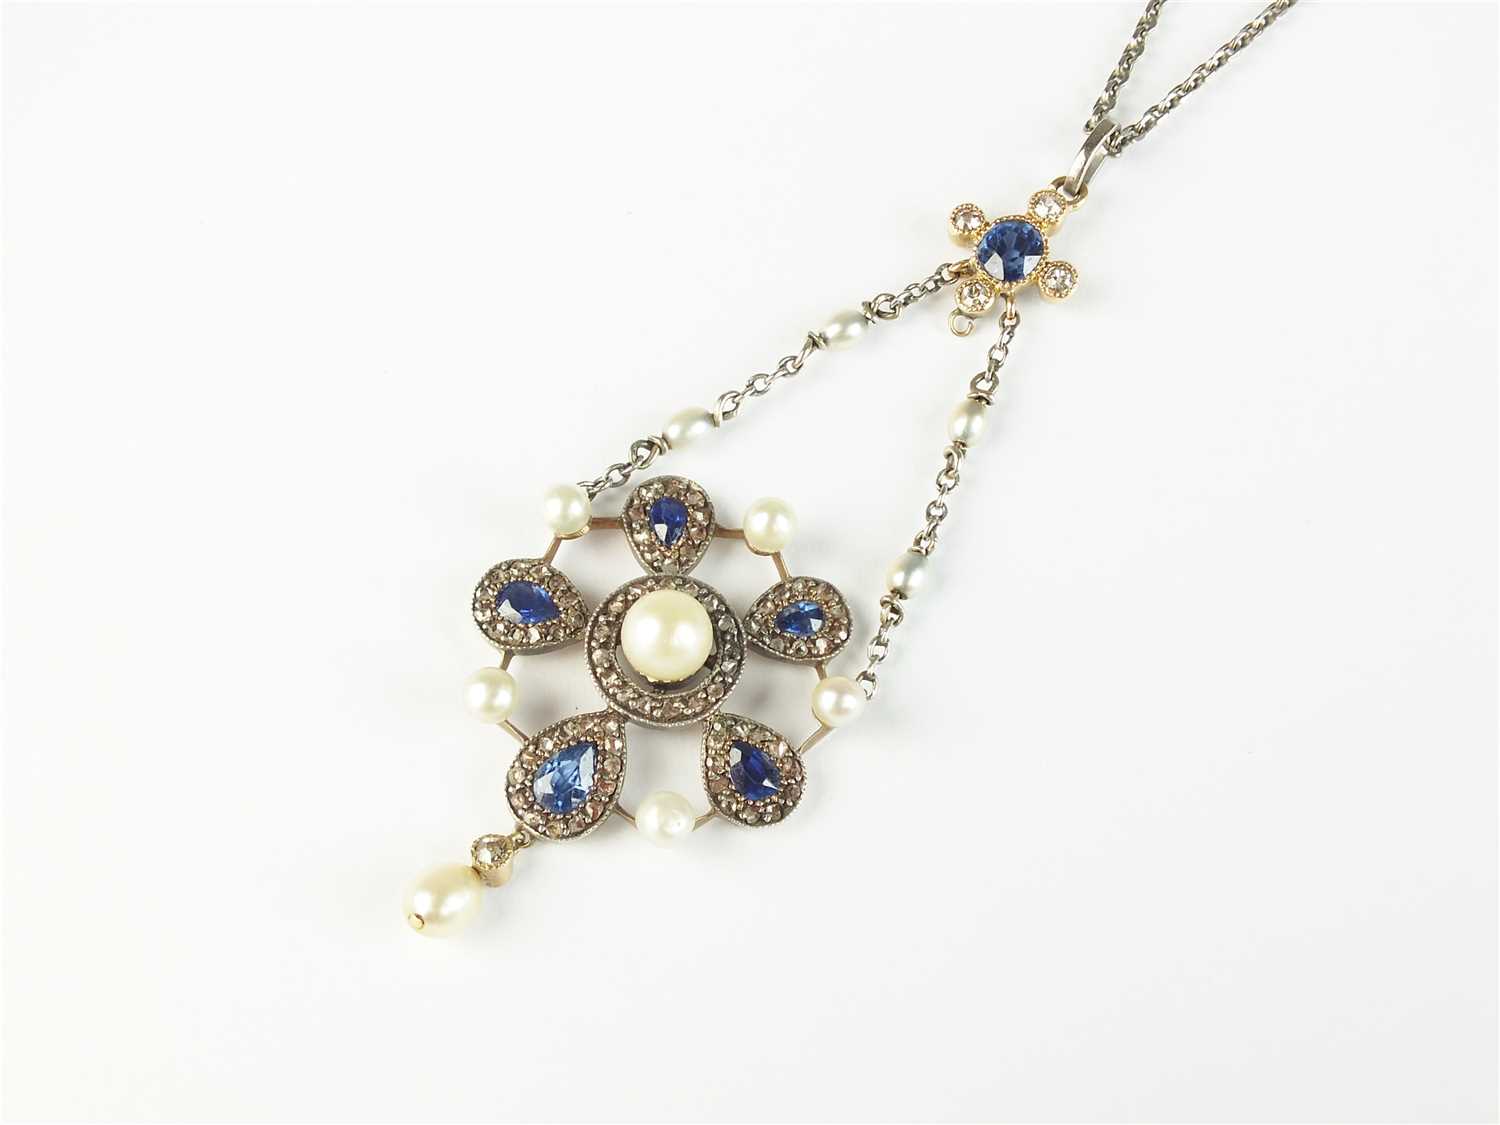 An early 20th century sapphire, pearl and diamond pendant